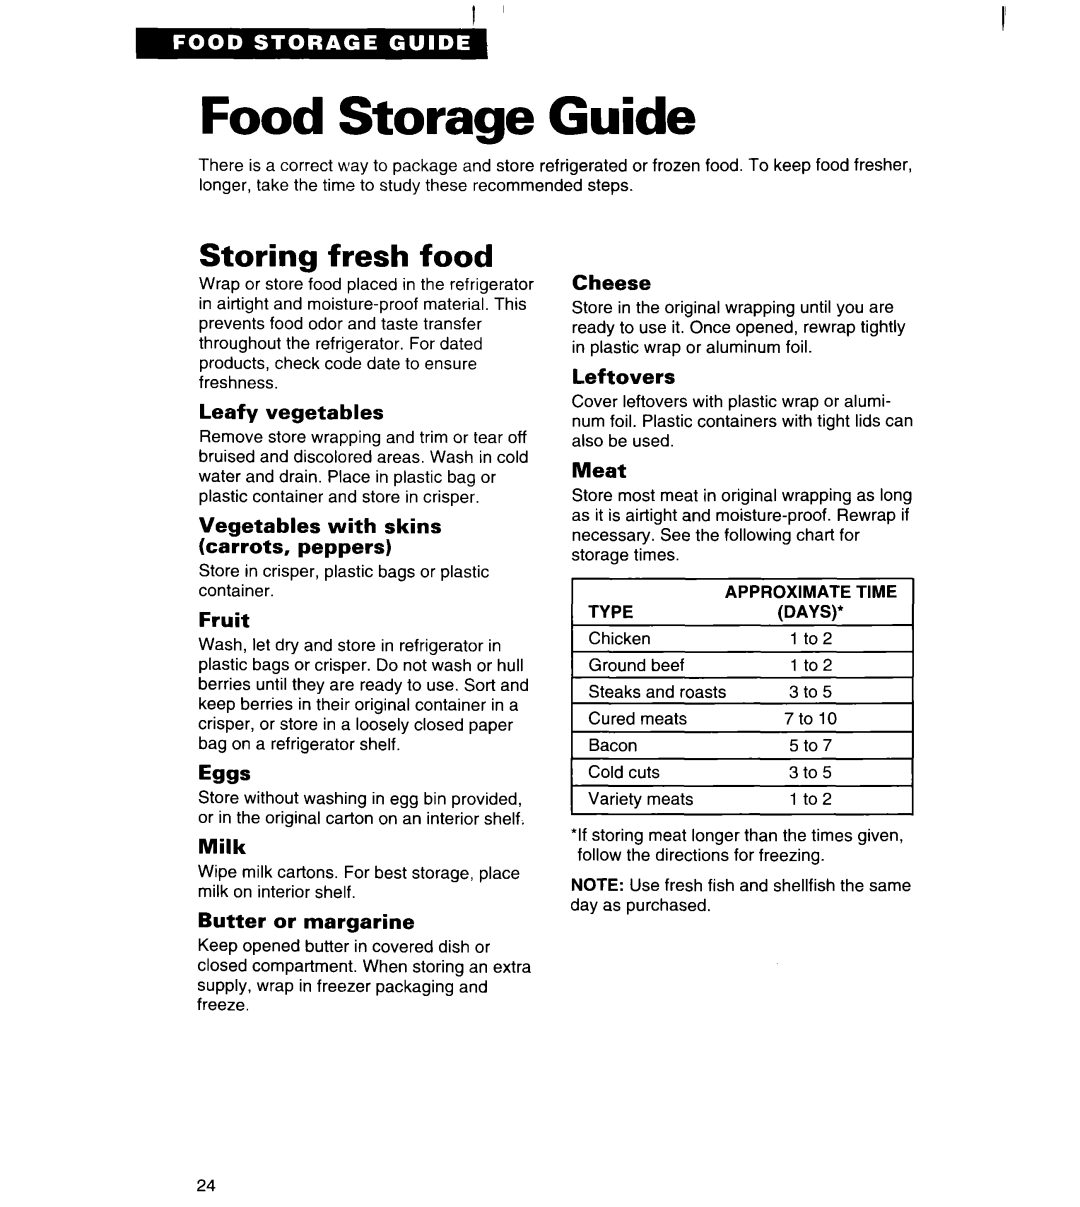 Whirlpool TS22AW Food Storage Guide, Storing fresh food, Leafy vegetables, Vegetables with skins carrots, peppers, Fruit 